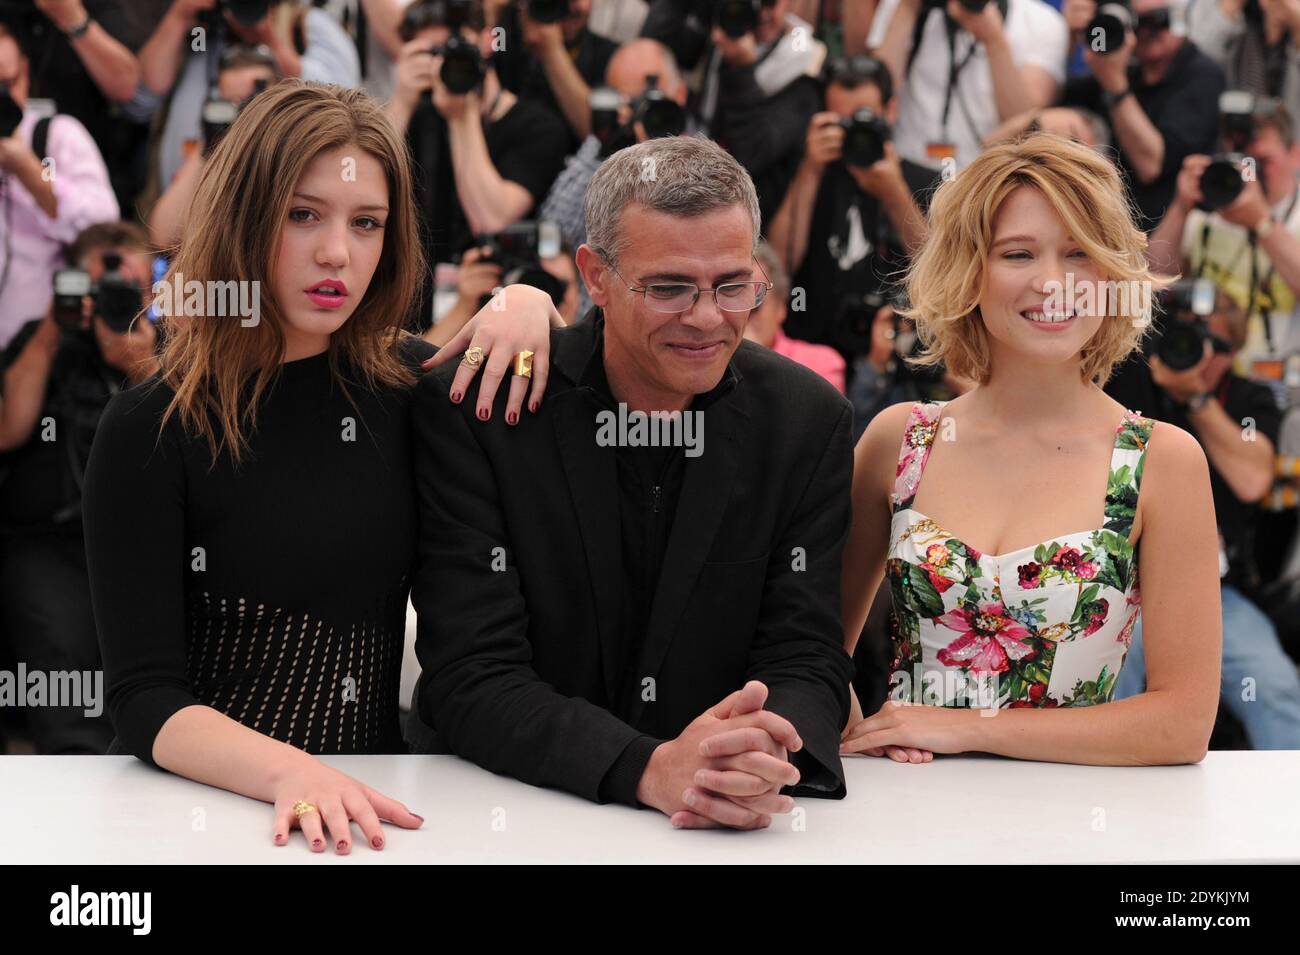 Adele Exarchopoulos, Abdellatif Kechiche and Lea Seydoux posing at the 'La  Vie d'Adele' photocall held at the Palais Des Festivals as part of the 66th  Cannes film festival, in Cannes, southern France,